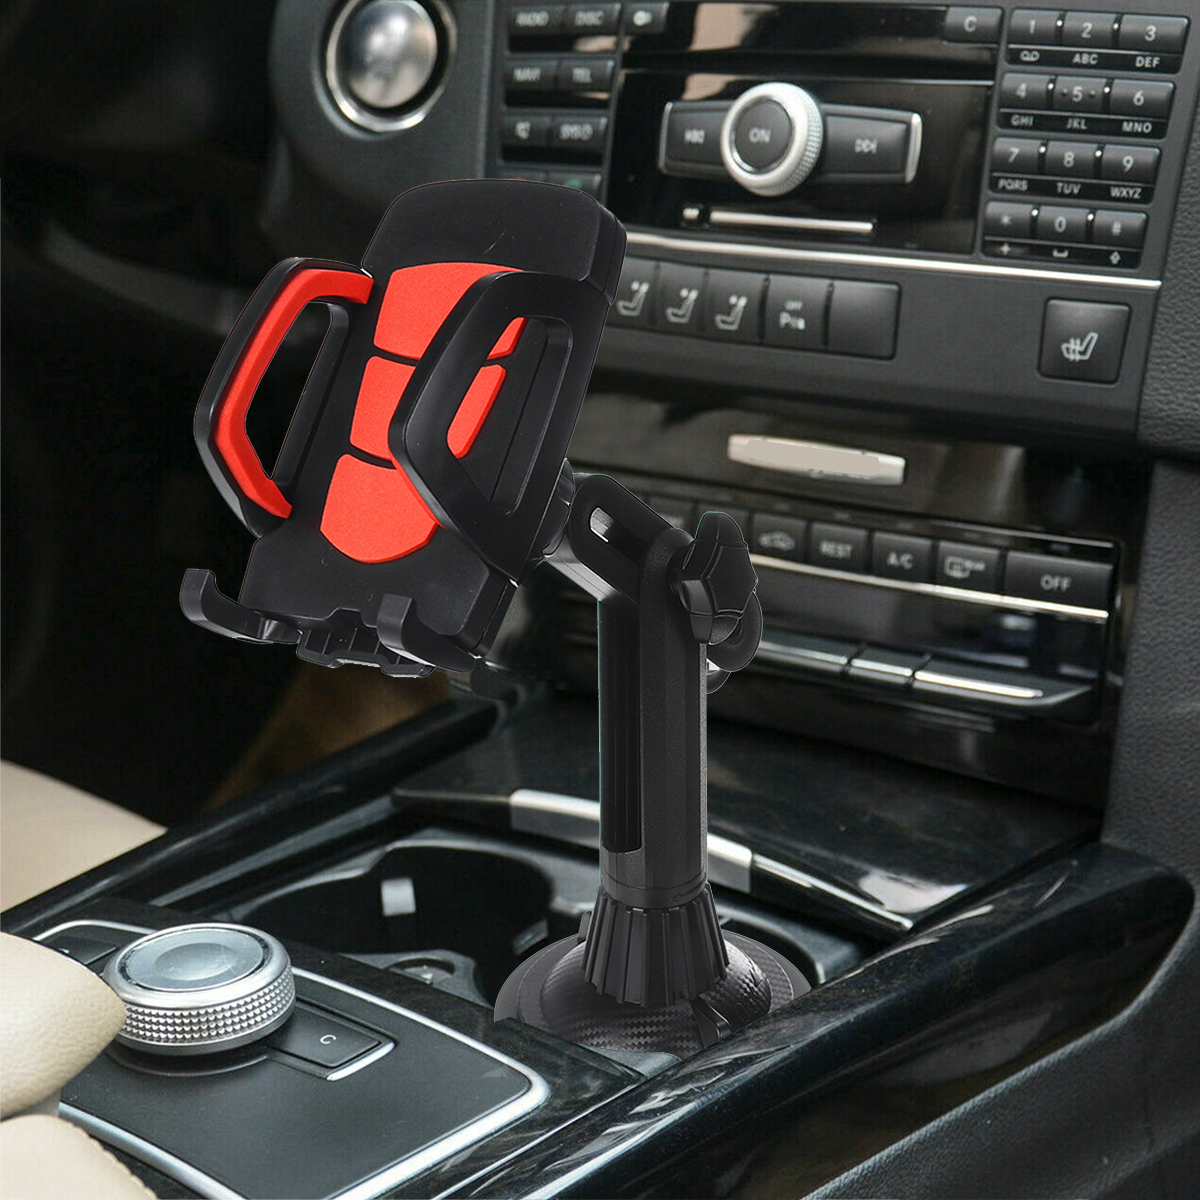 Bakeey-Car-Mount-360deg-Adjustable-Cup-Holder-Cradle-for-iPhone-12-for-Samsung-Galaxy-Note-20-ultra--1778684-9